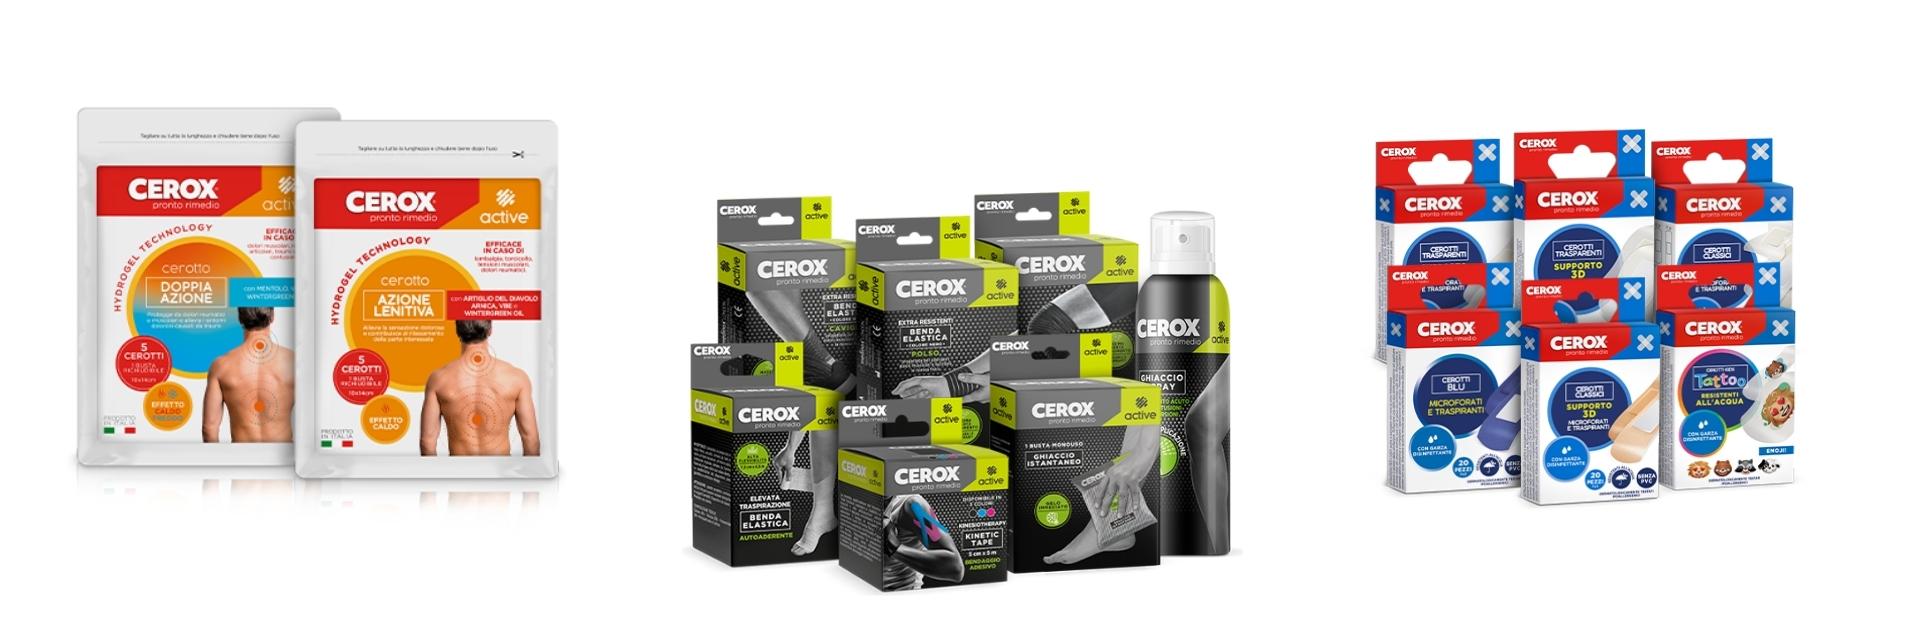 Cerox®: business product line.